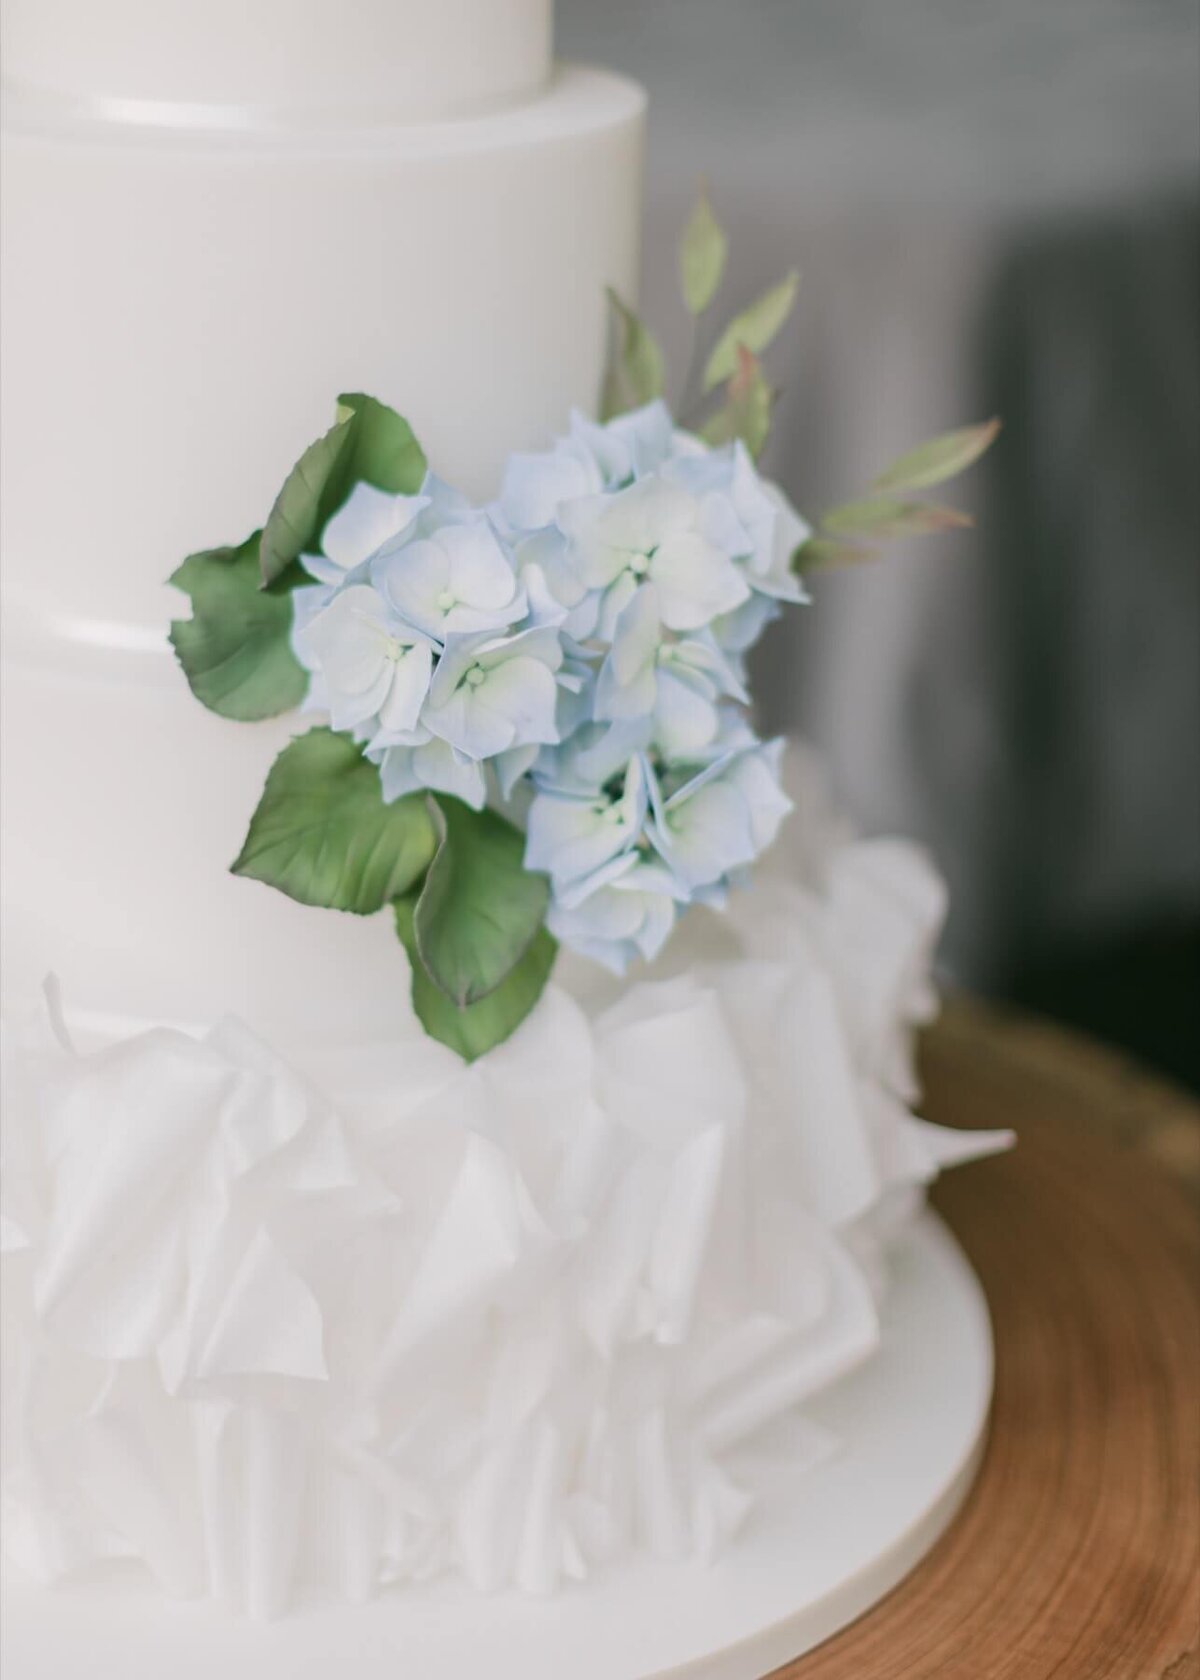 A close up of a white wedding cake showing ruffles at the bottom and blue hydrangea sugar flowers